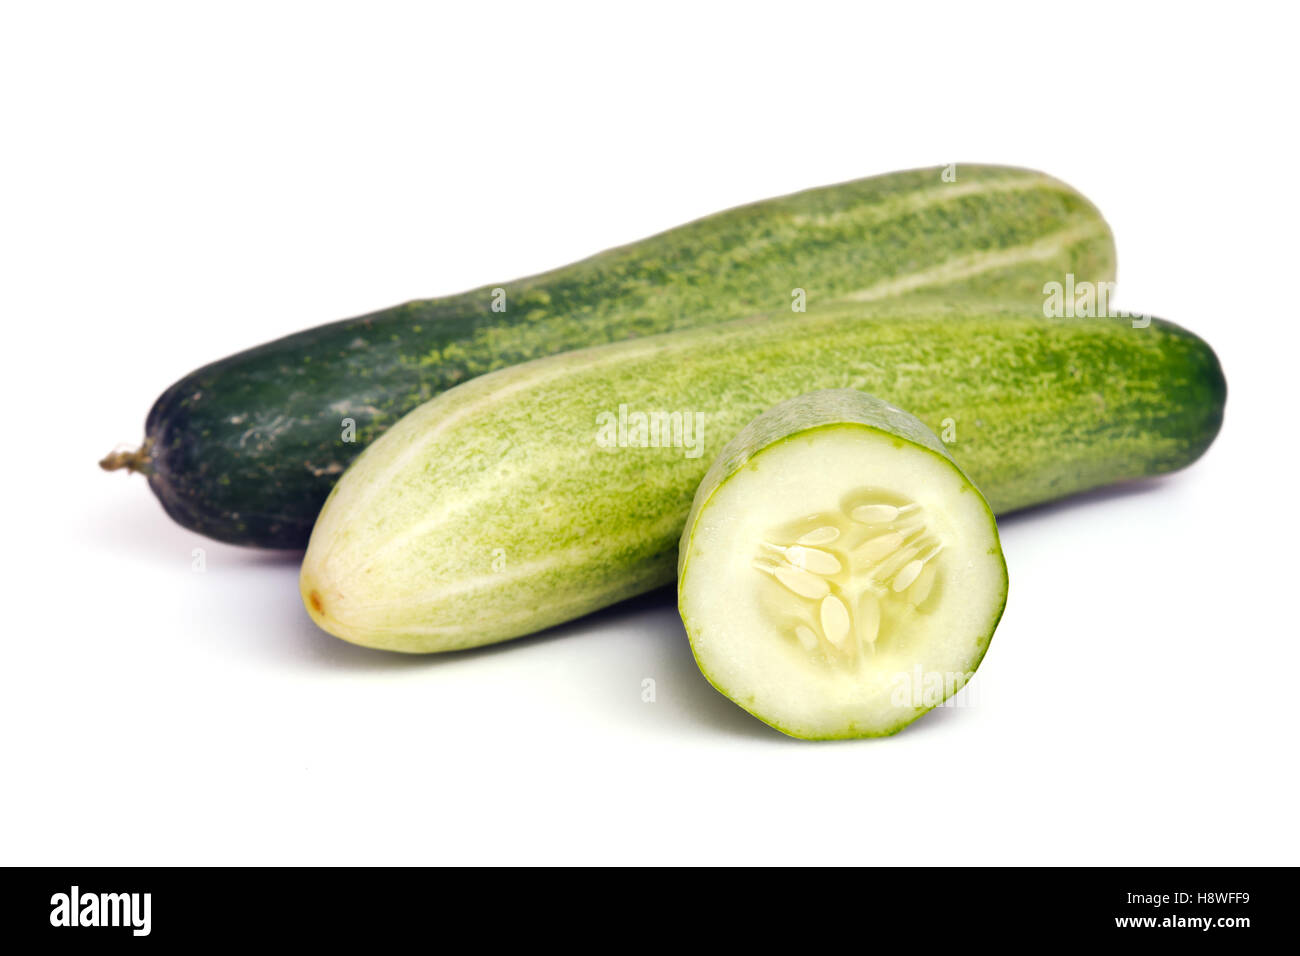 Fresh cucumber (also named as Cucumis sativus, cucurbitaceae, Cucumis cucumber, or wild cucumber) isolated on white background Stock Photo